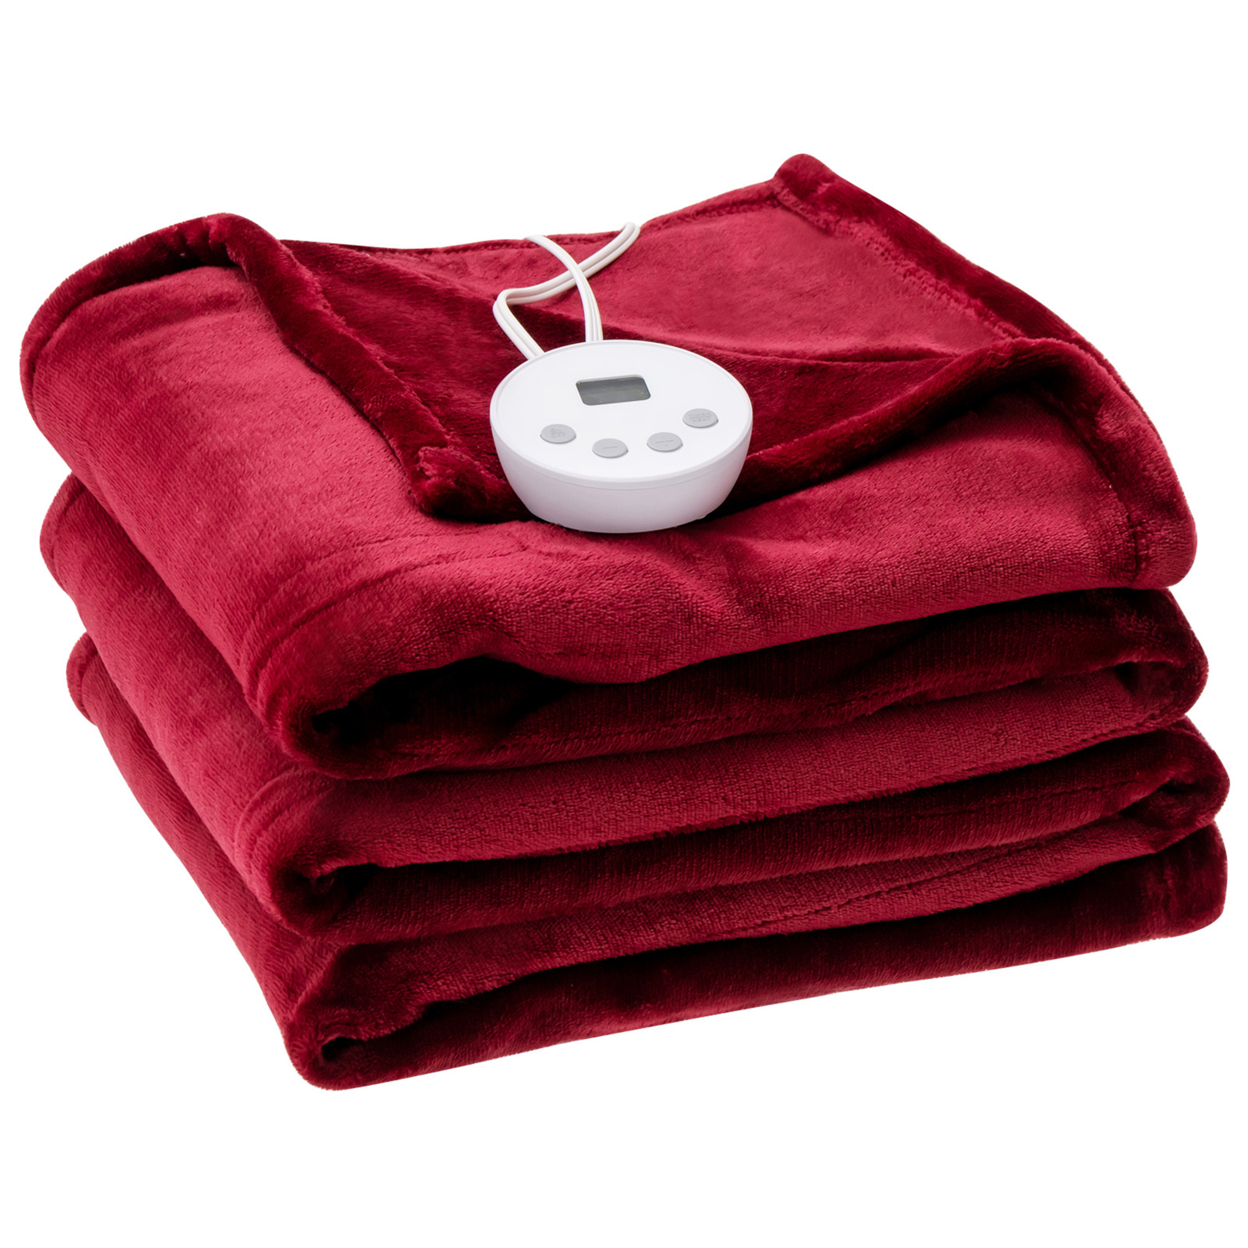 62''x84''/84''x90'' Heated Blanket Twin/Queen Size Electric Heated Throw Blanket W/ Timer - Red, Twin